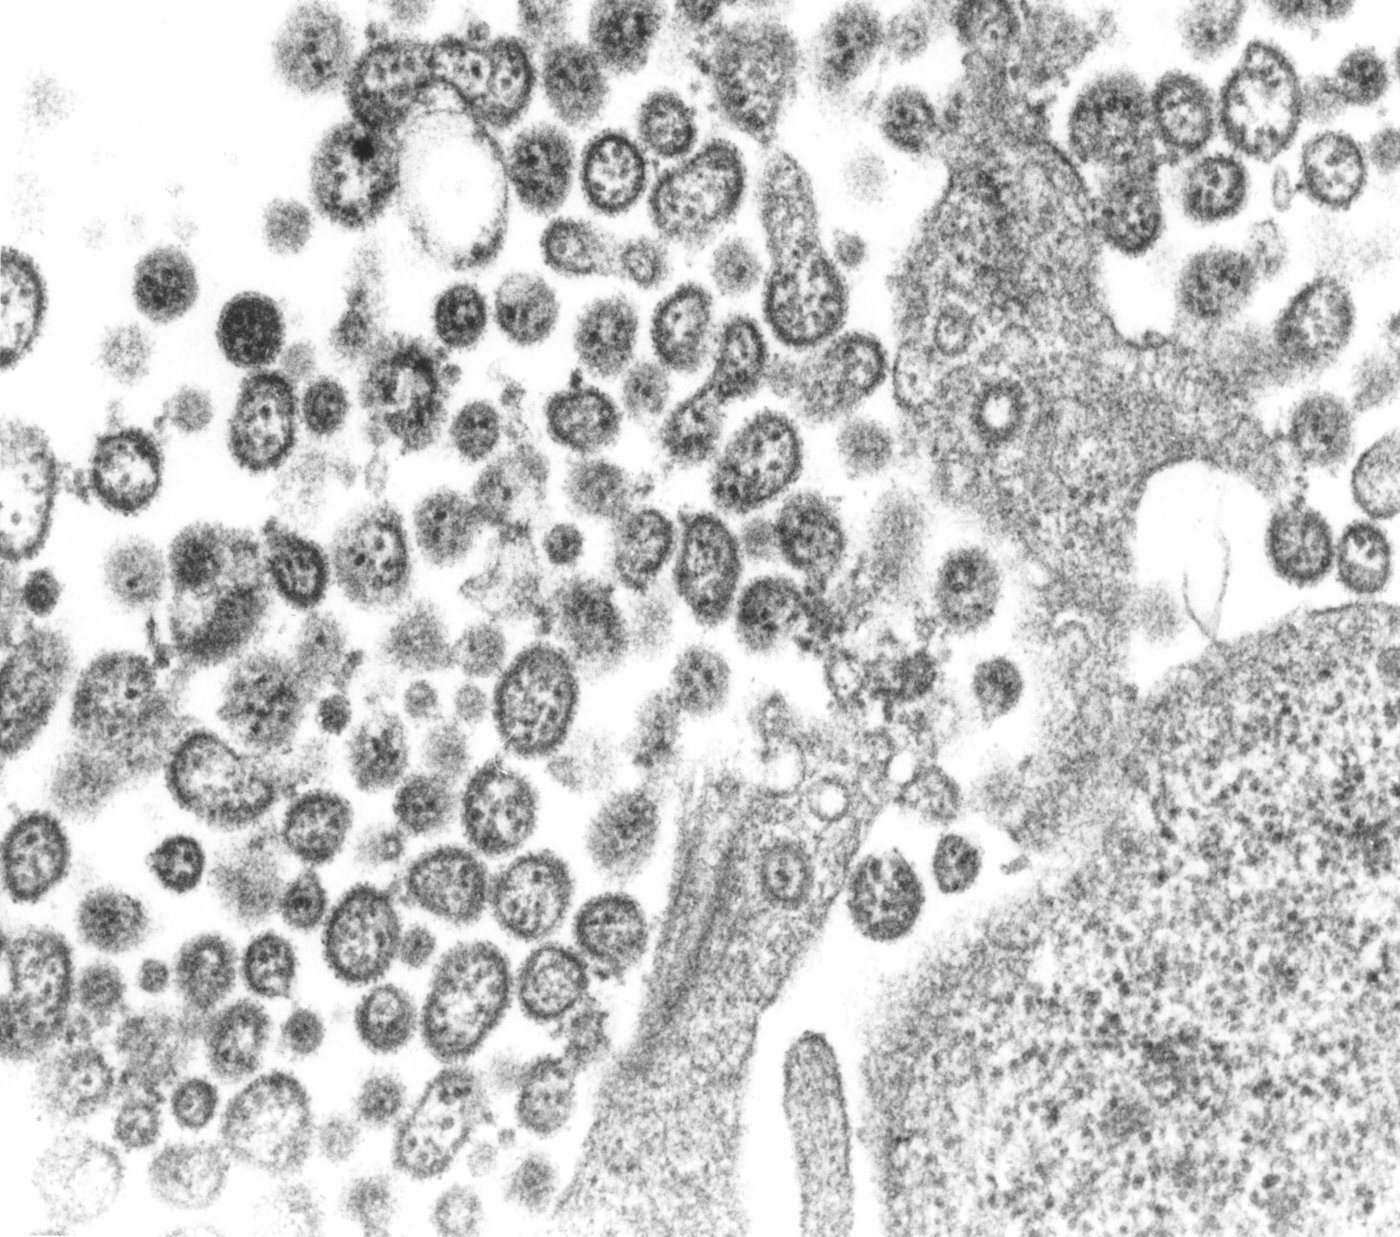 The photo shows an electron microscope image of about 30 Lassa virus particles.